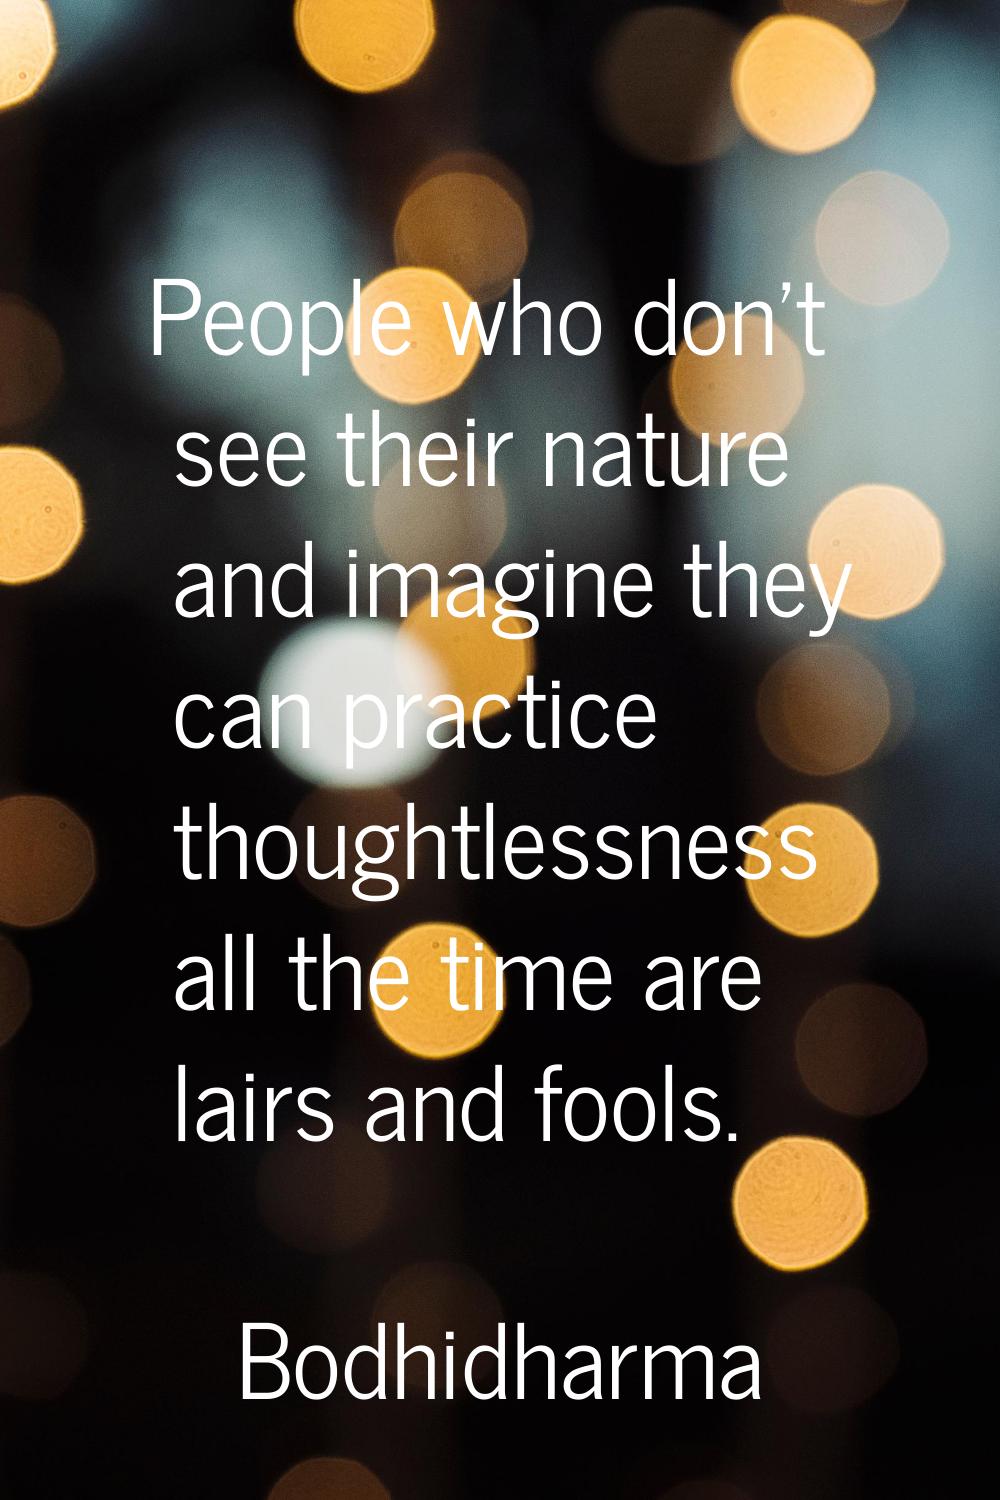 People who don't see their nature and imagine they can practice thoughtlessness all the time are la